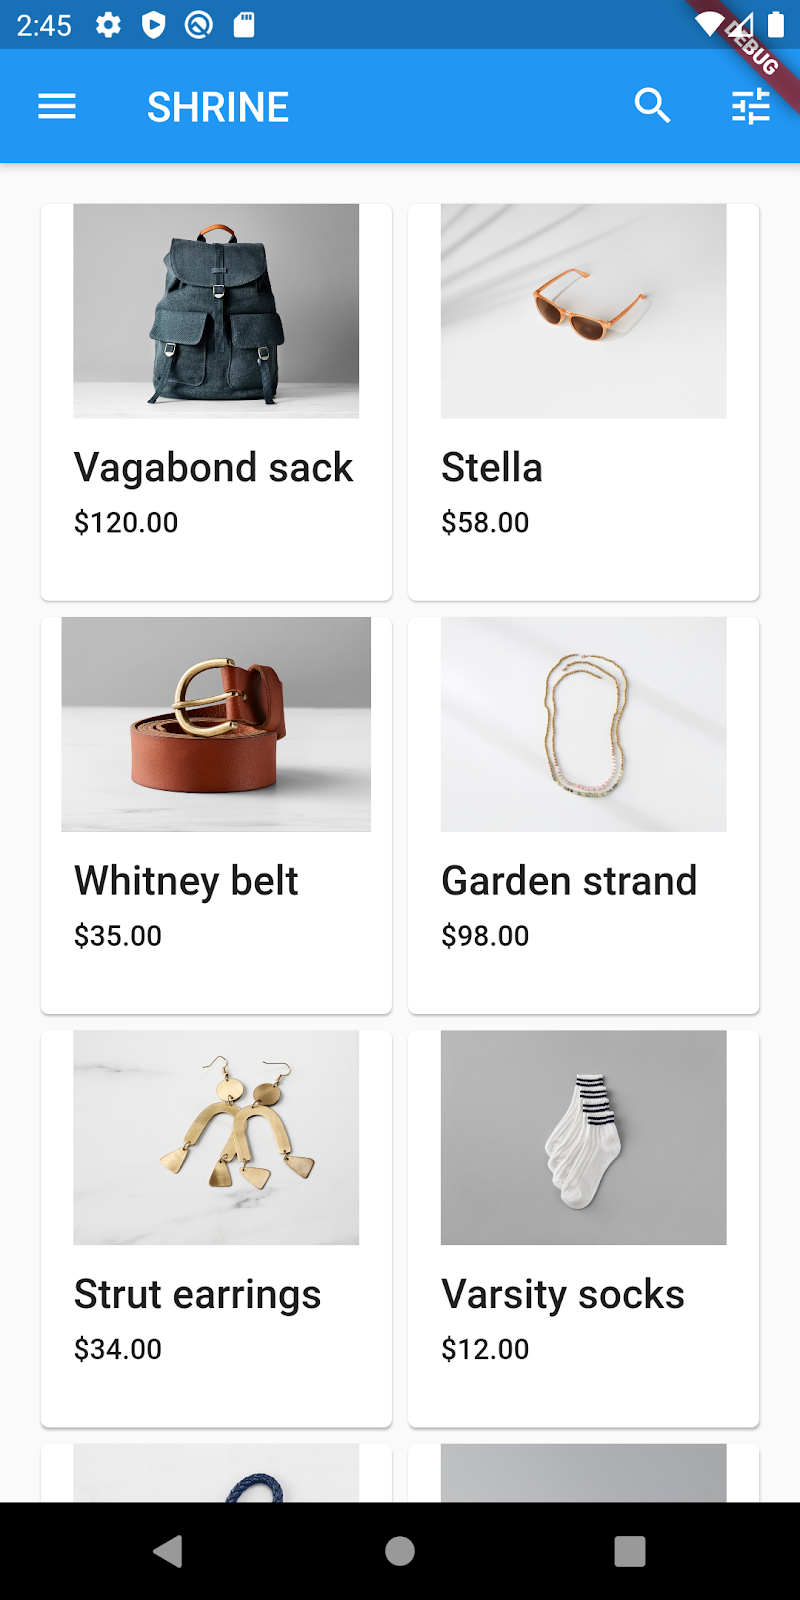 a grid of items with an image, product title, and price